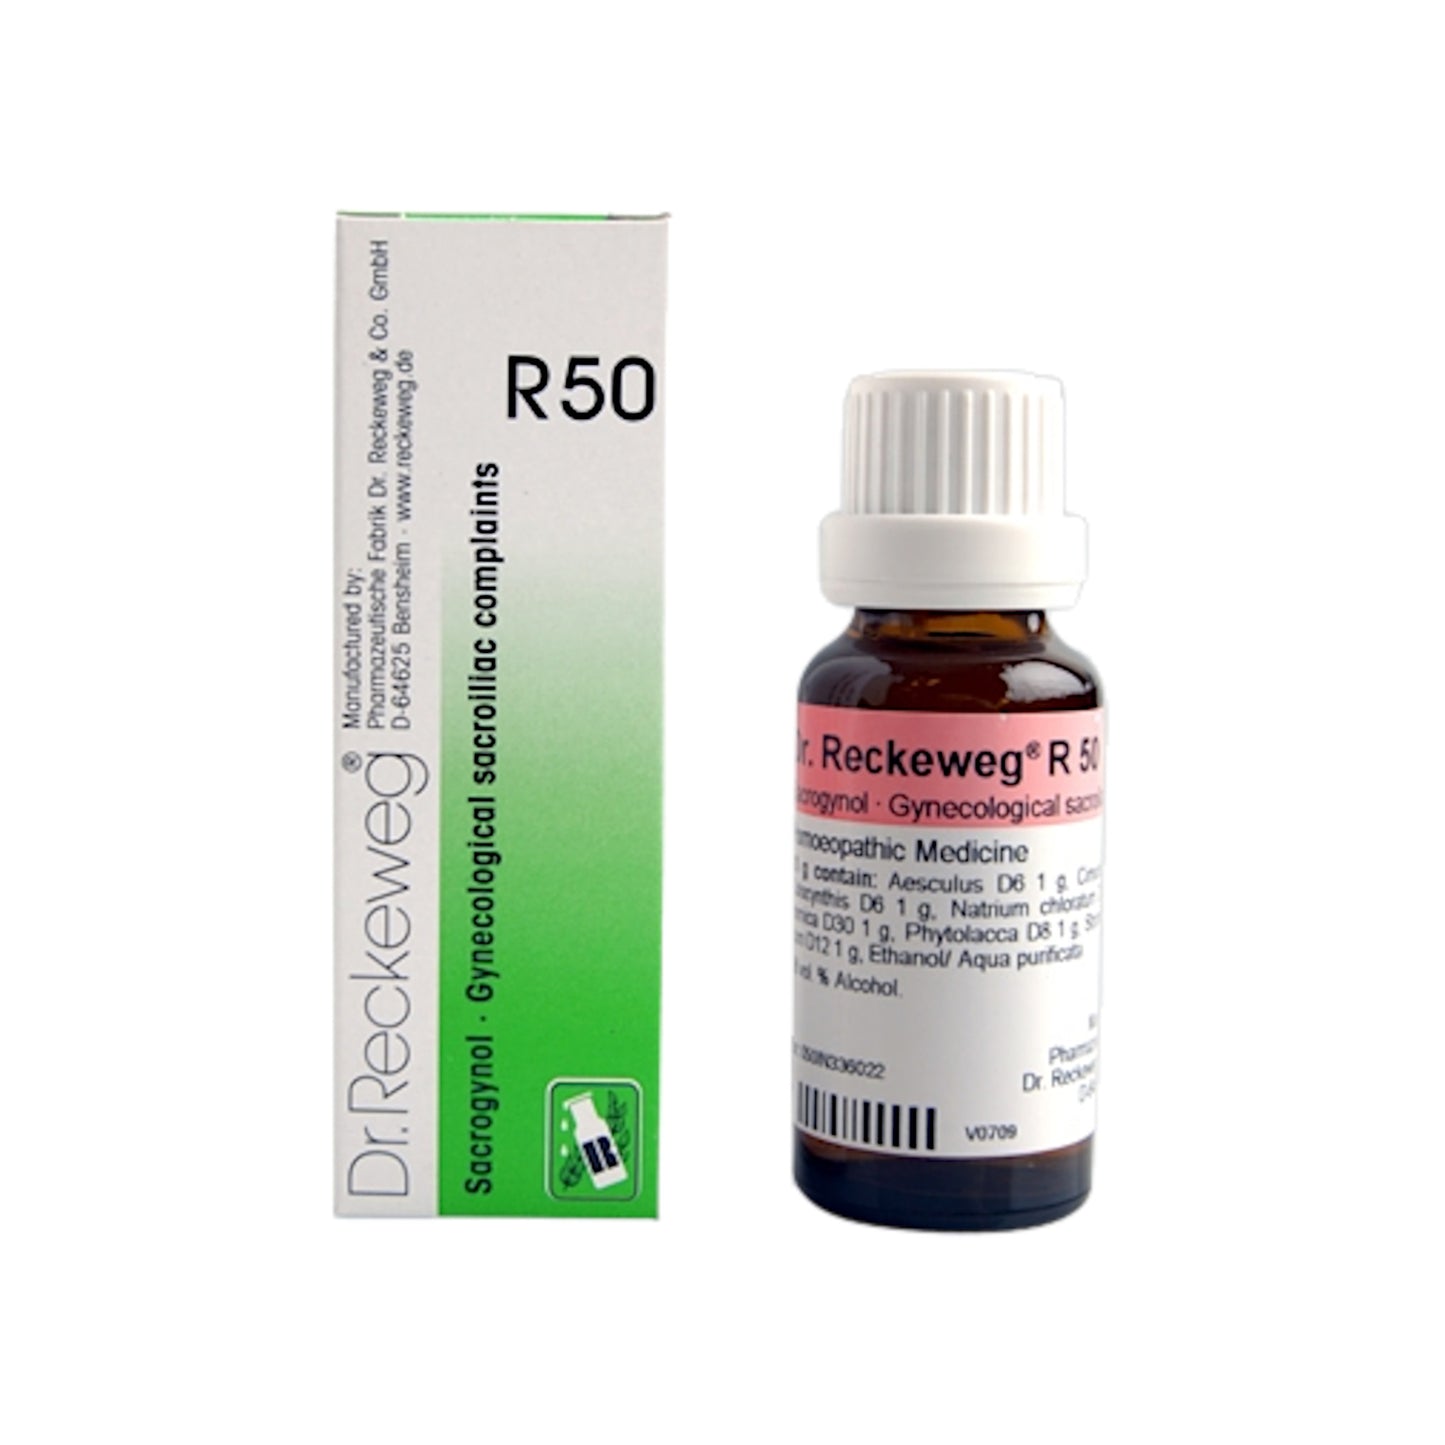 Image for Dr. Reckeweg R50 Sacrogynol Drops - 22 ml, for sacral pain relief."